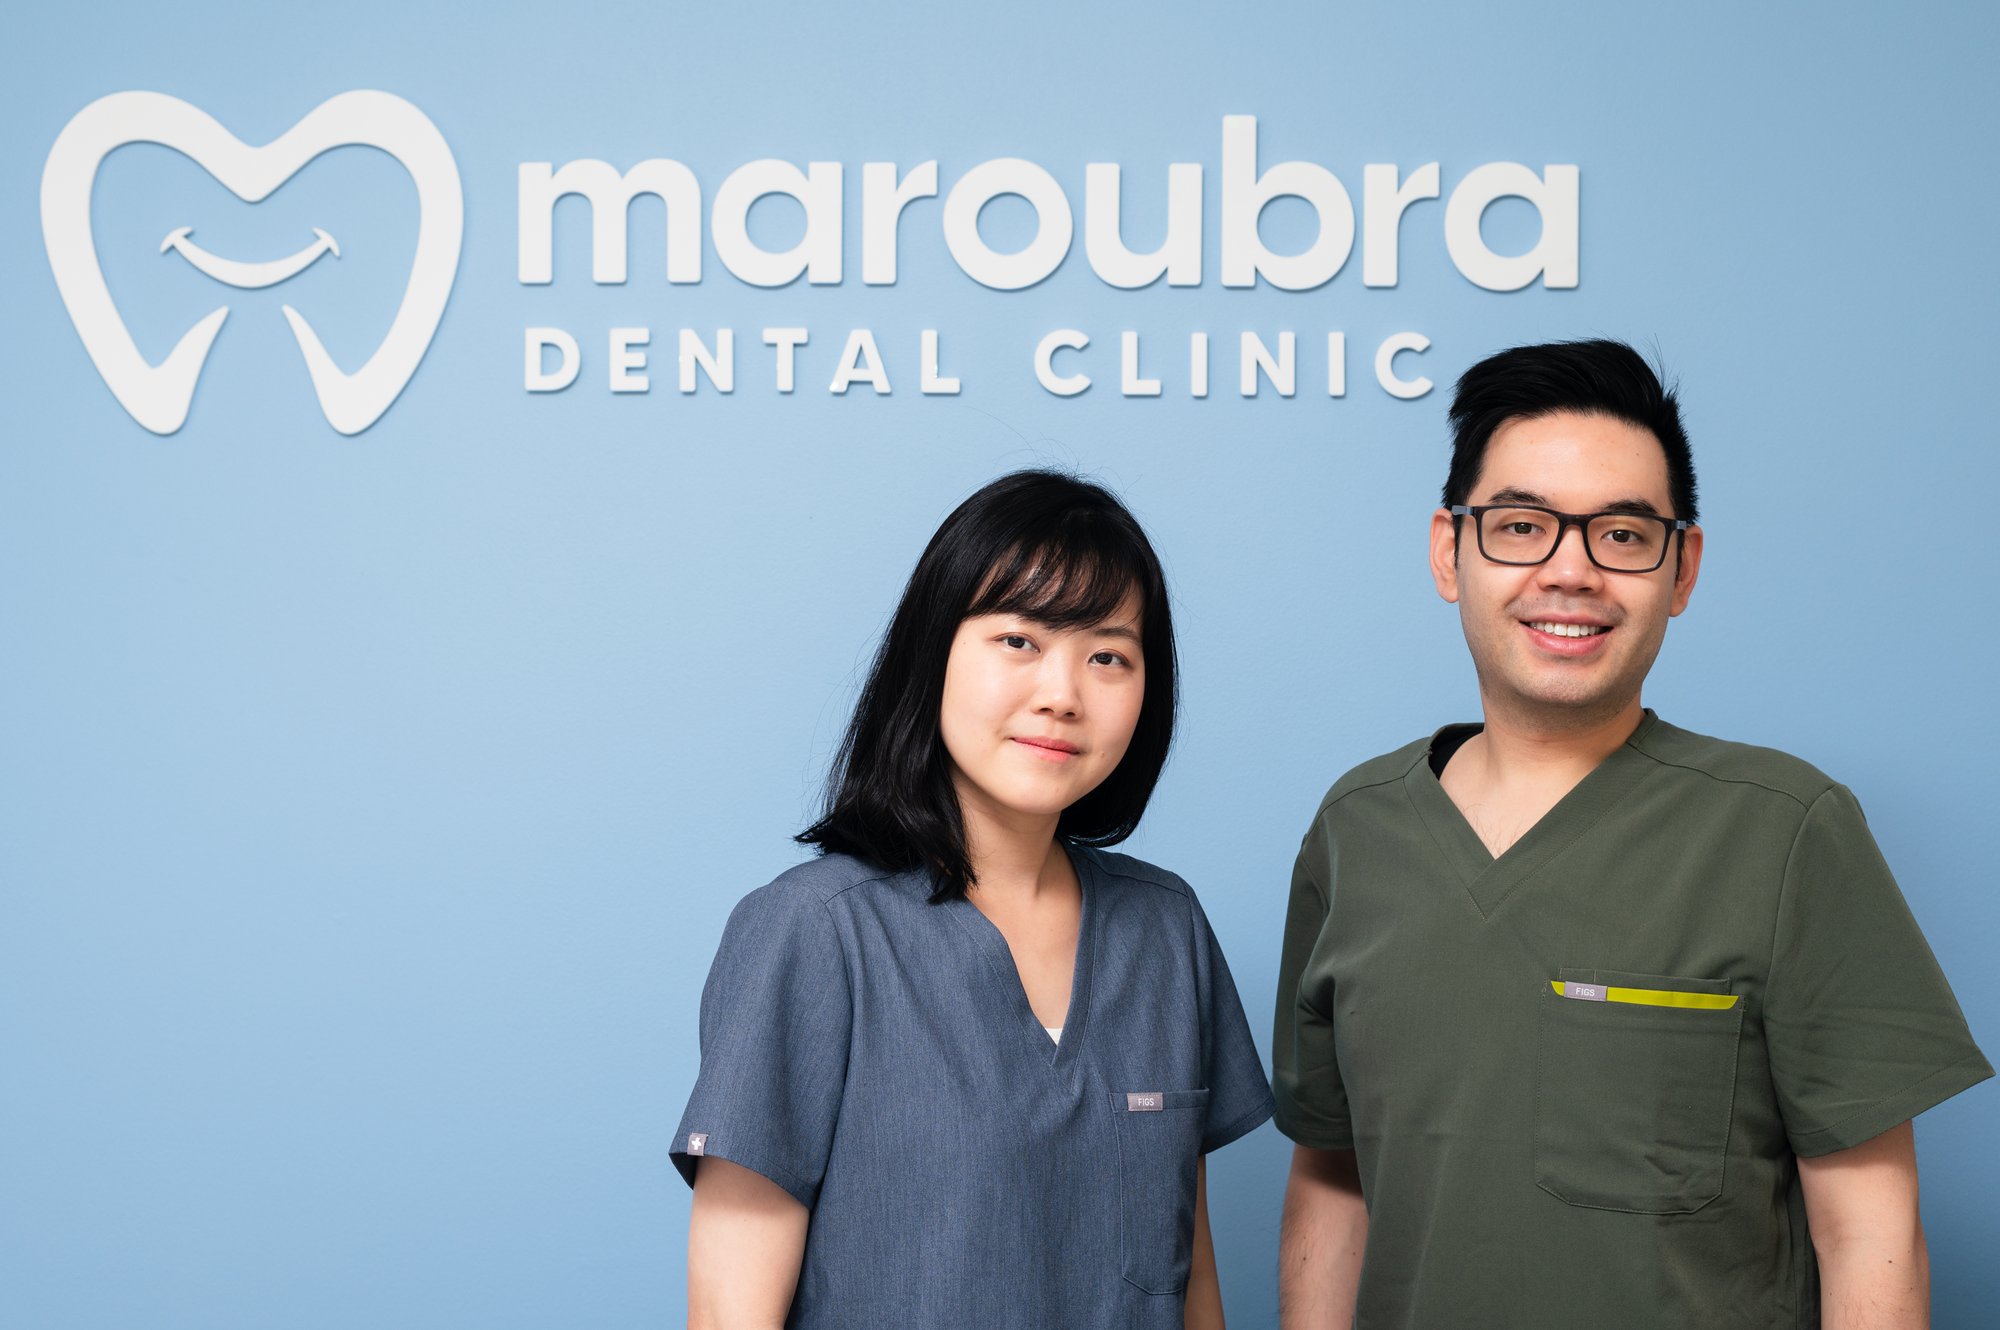 male and female in front of maroubra dental clinic sign